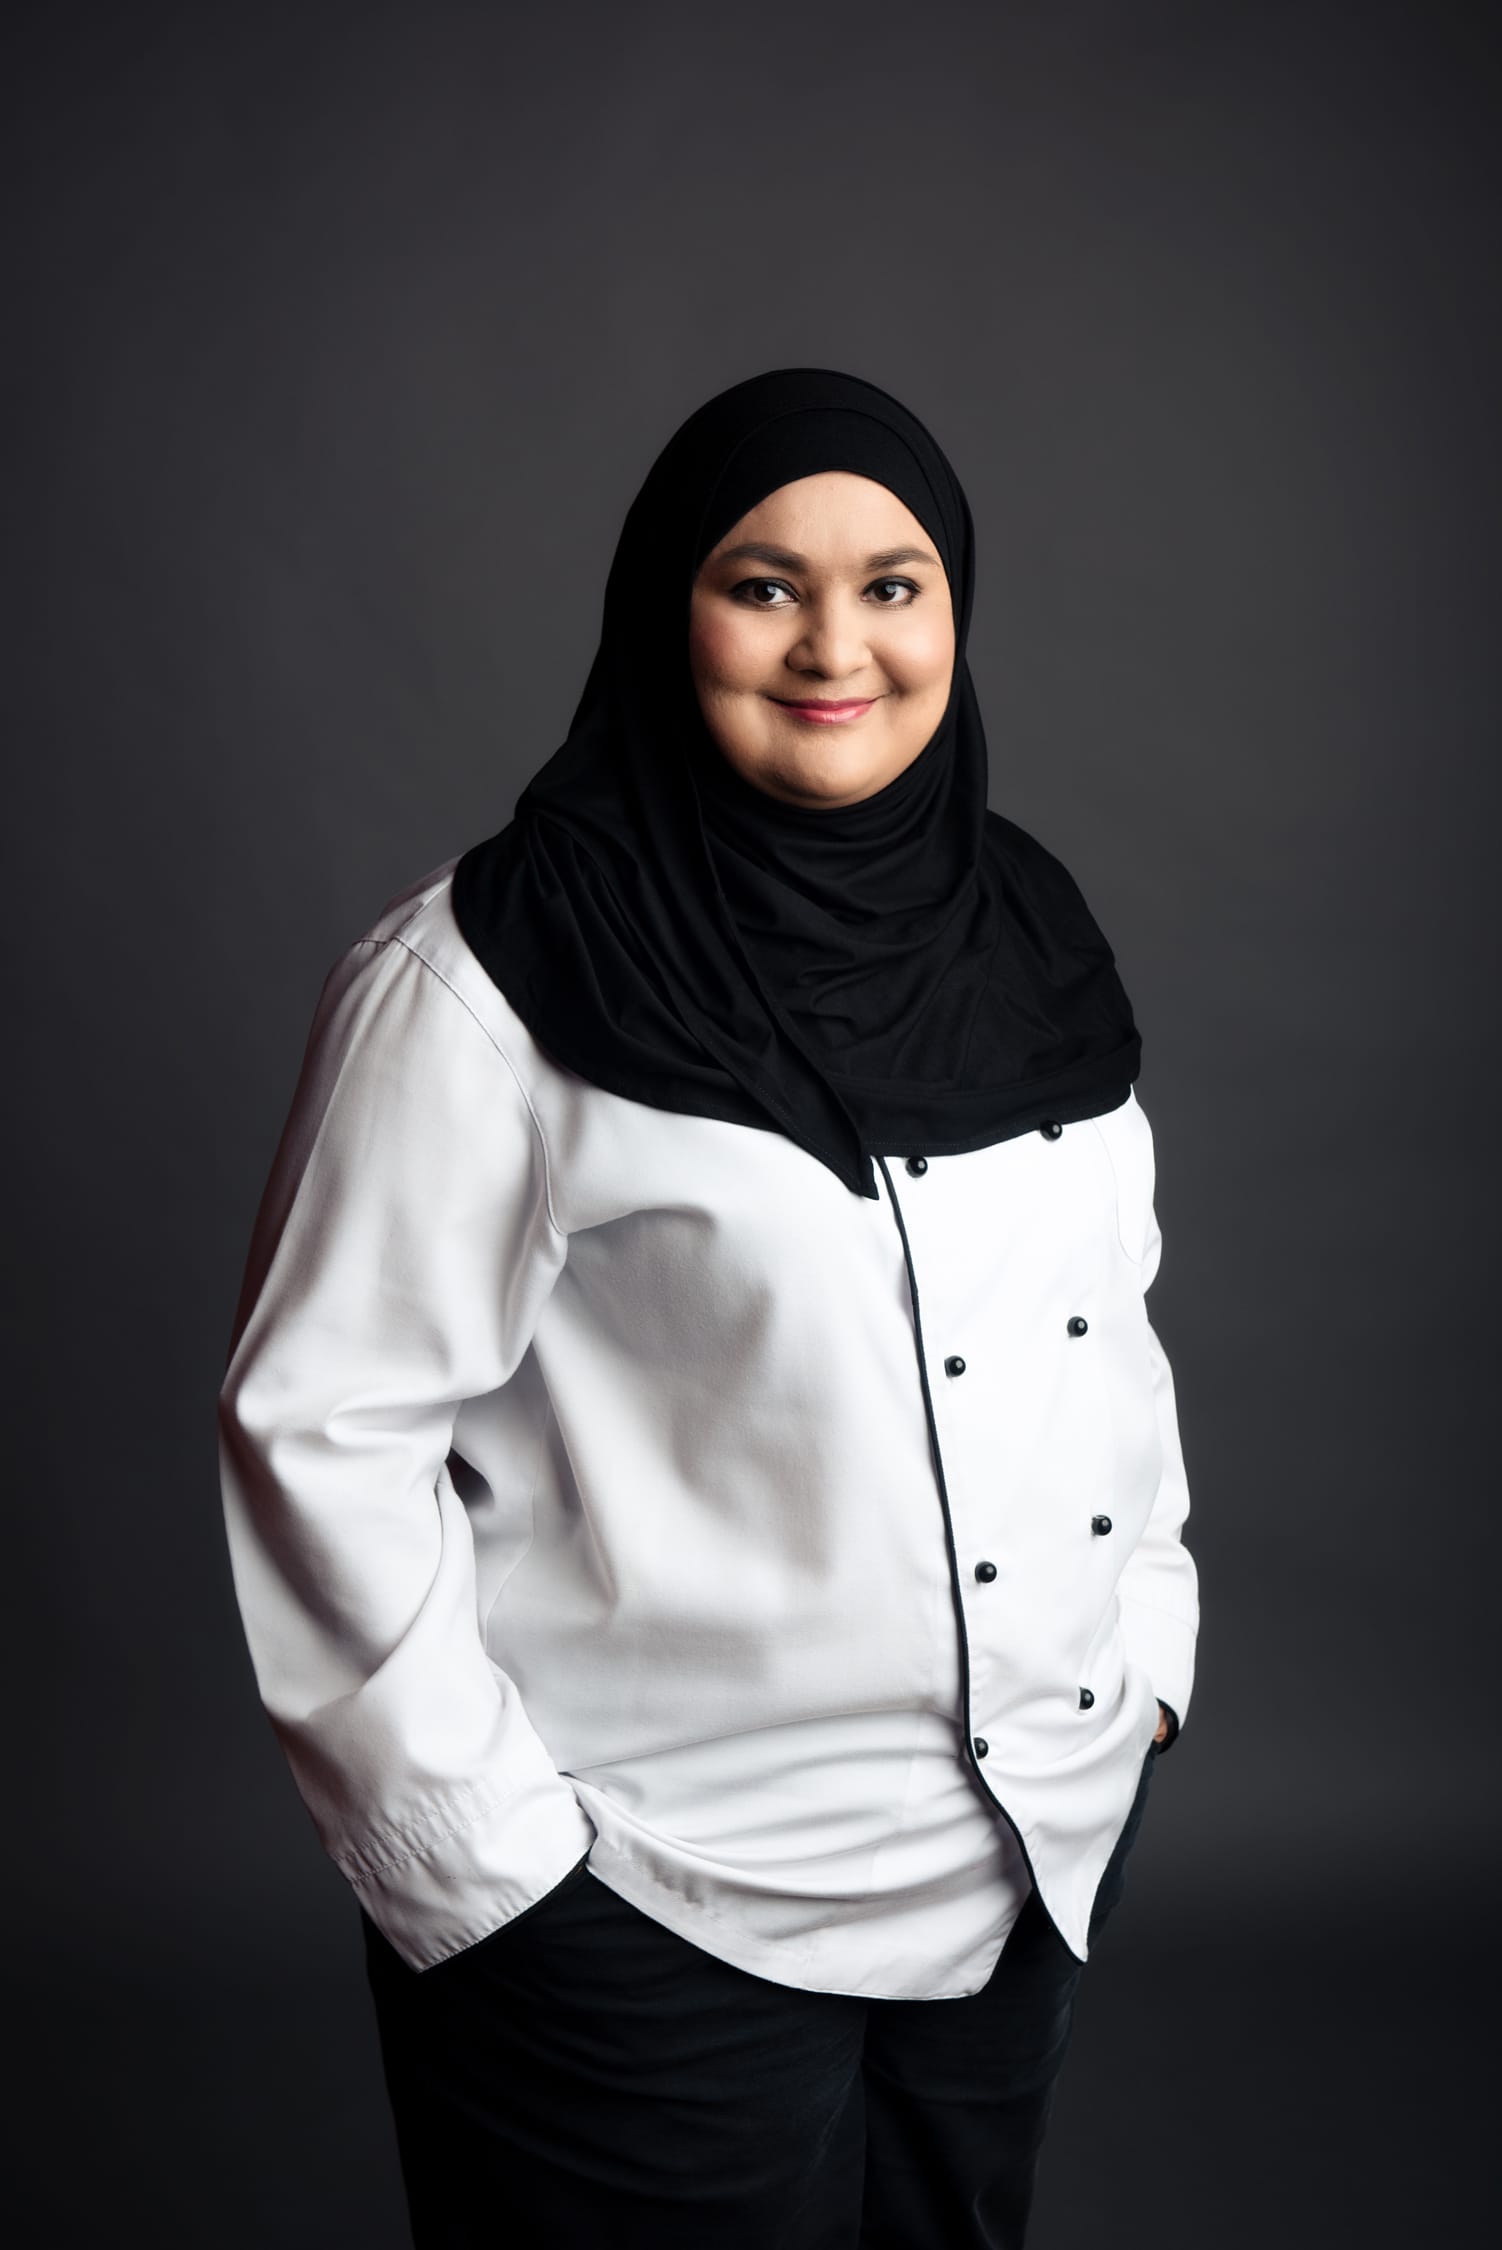 A woman wearing a hijab and chef's uniform poses for her headshot against a black studio background during a professional indoor photo shoot in Singapore